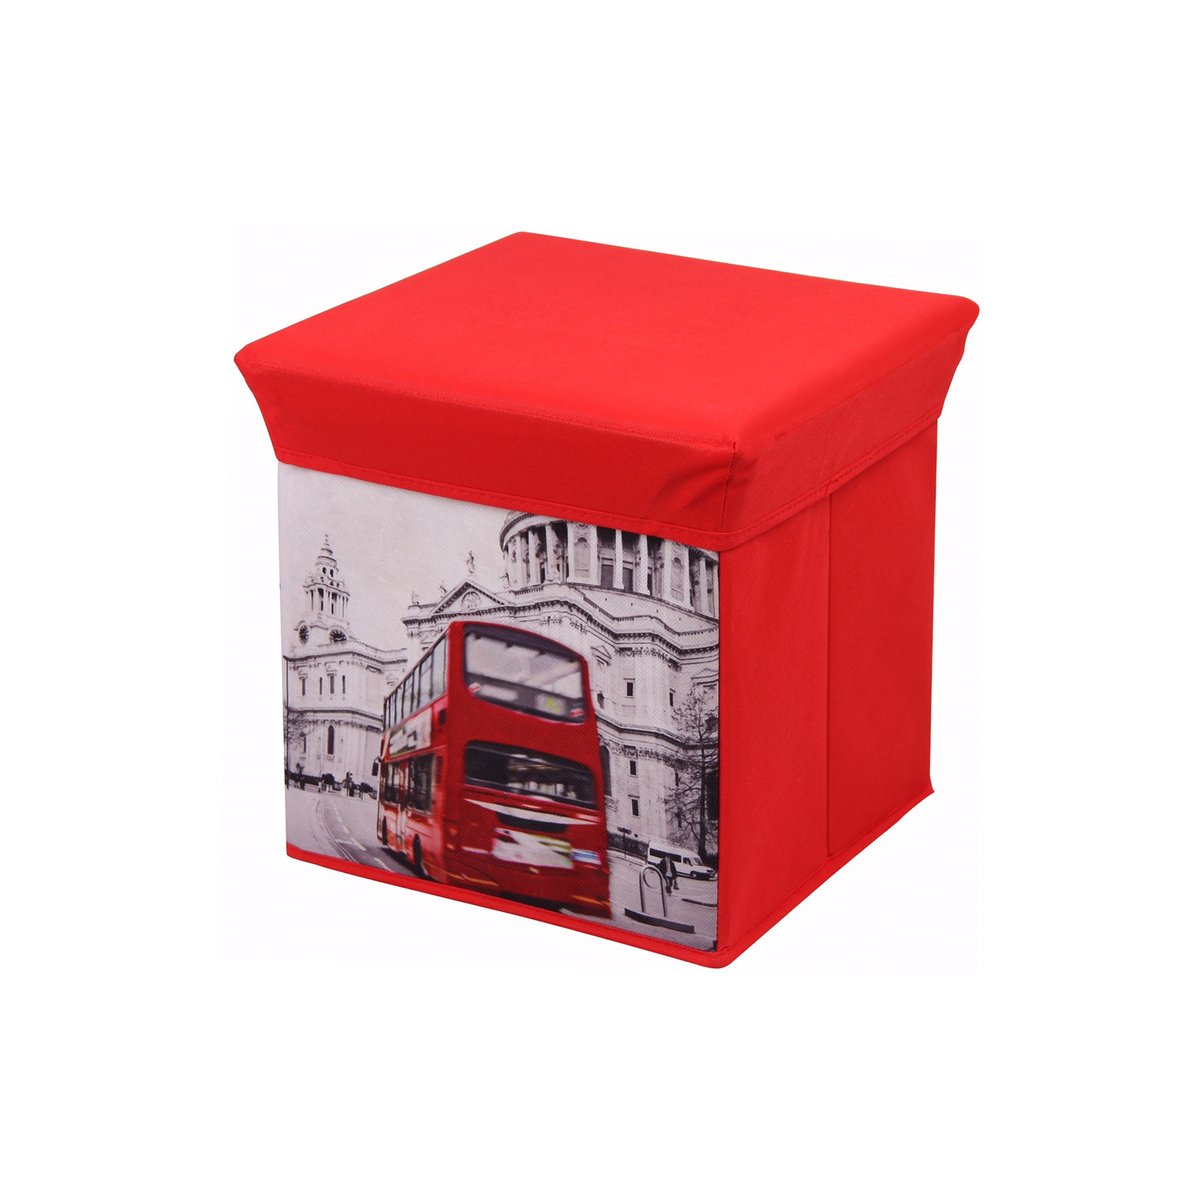 Home Style Storage Box Assorted Colors Size : W38 x D38 x H38cm